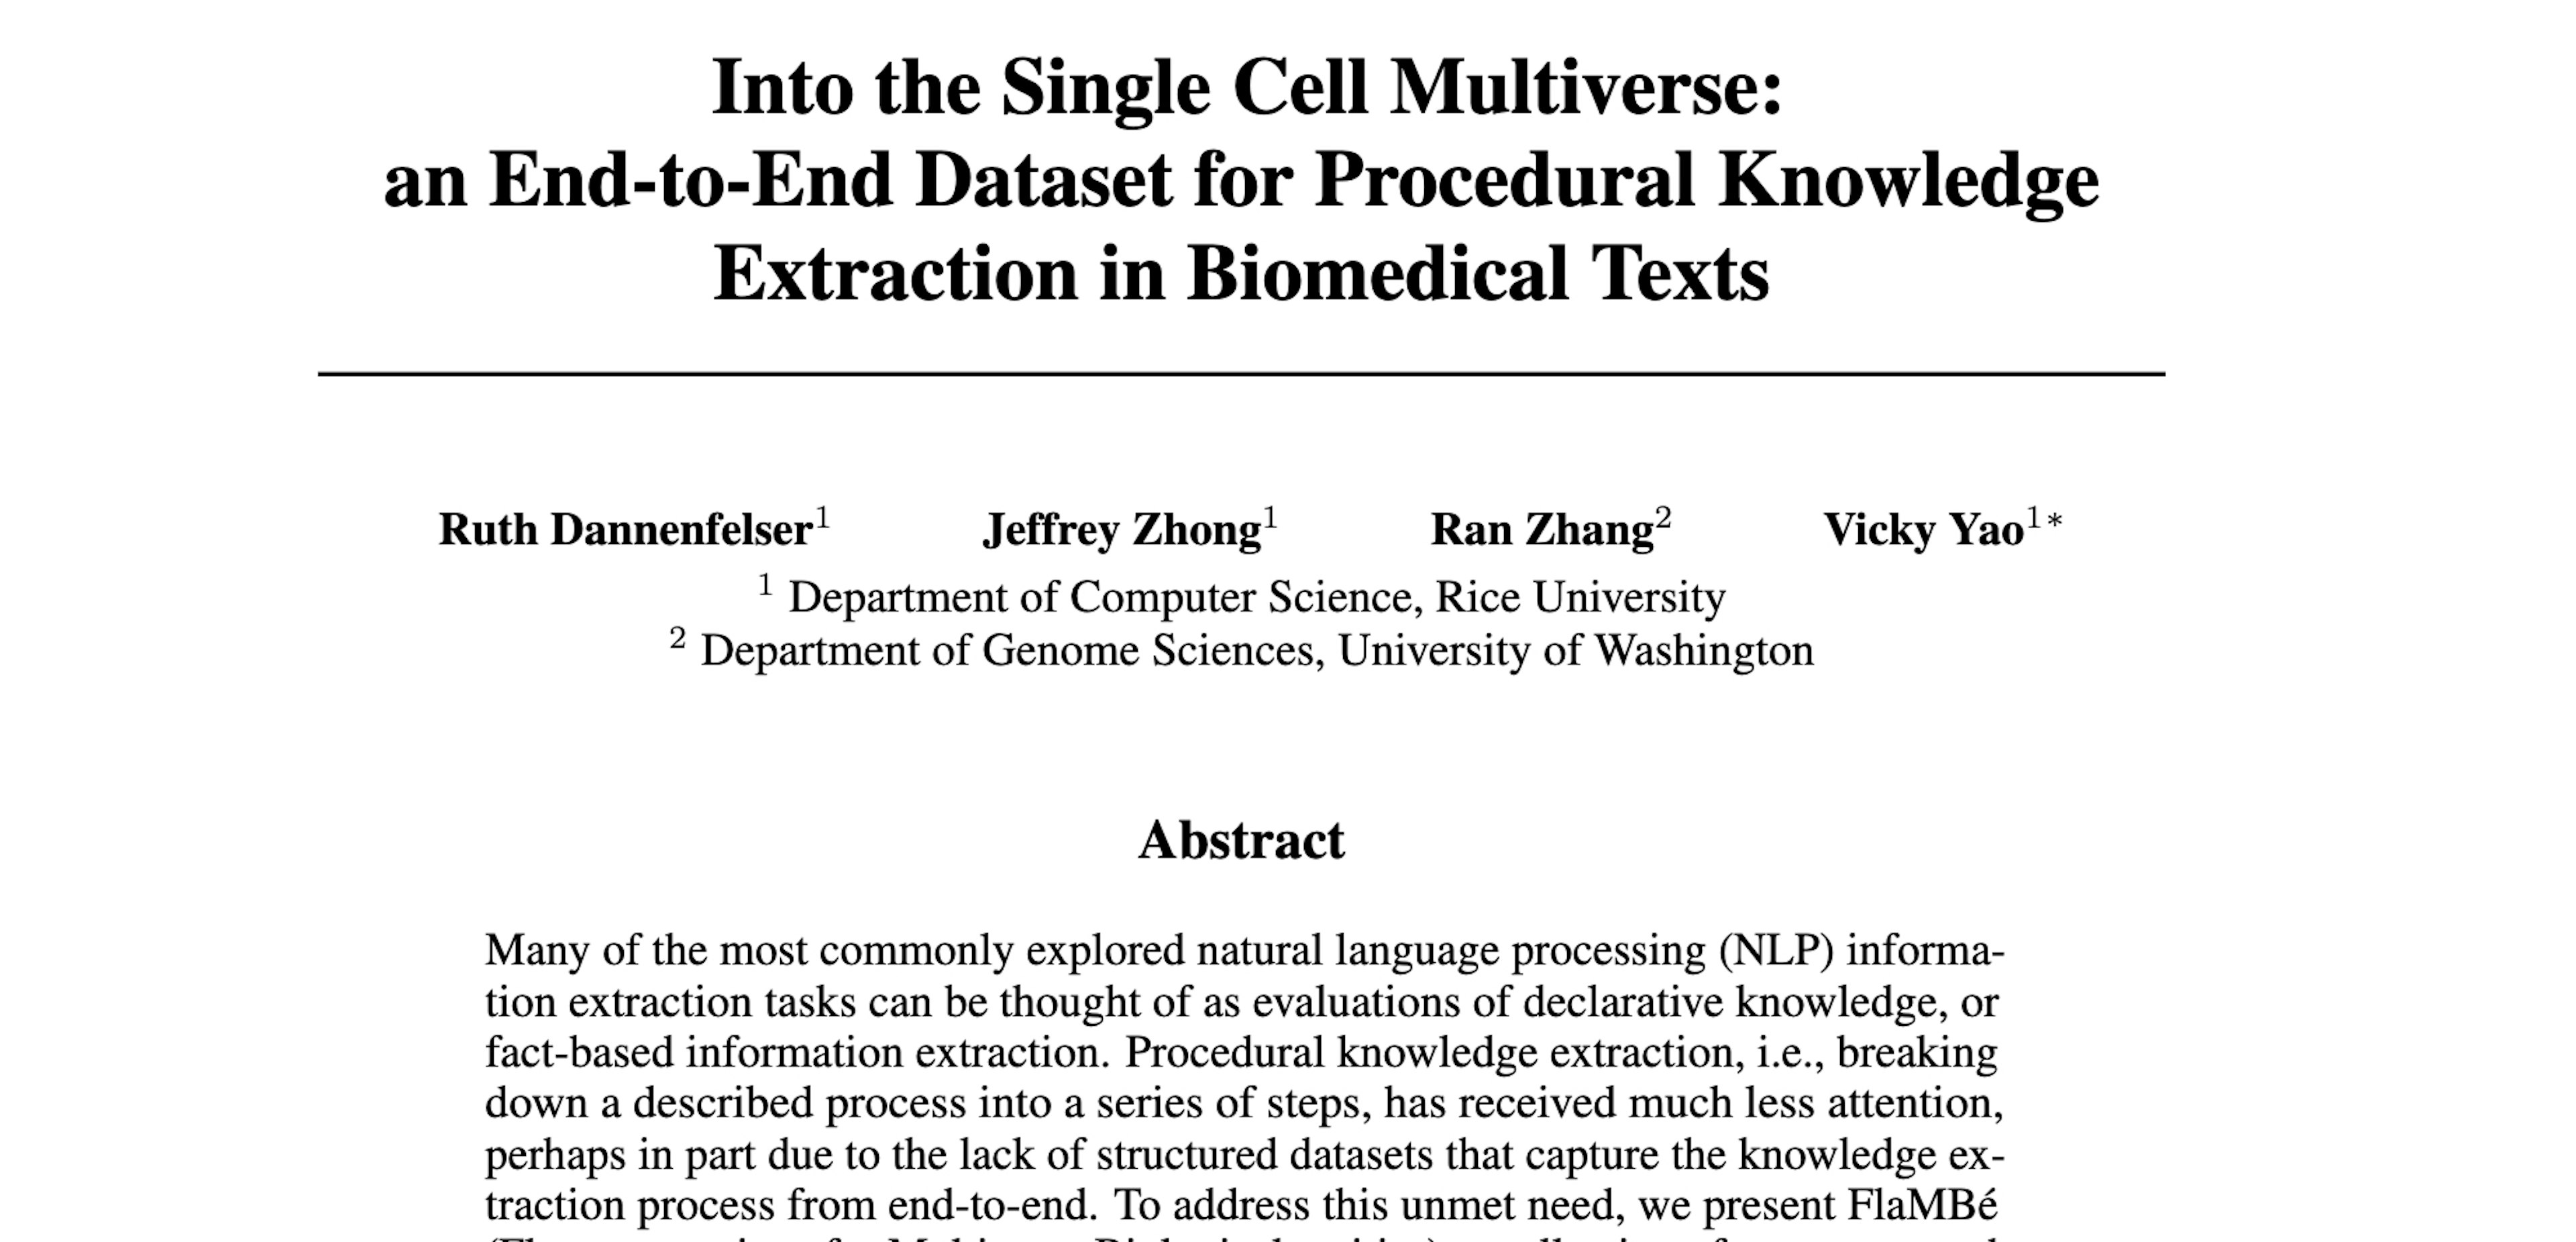 Into the Single Cell Multiverse: an End-to-End Dataset for Procedural Knowledge Extraction in Biomedical Texts